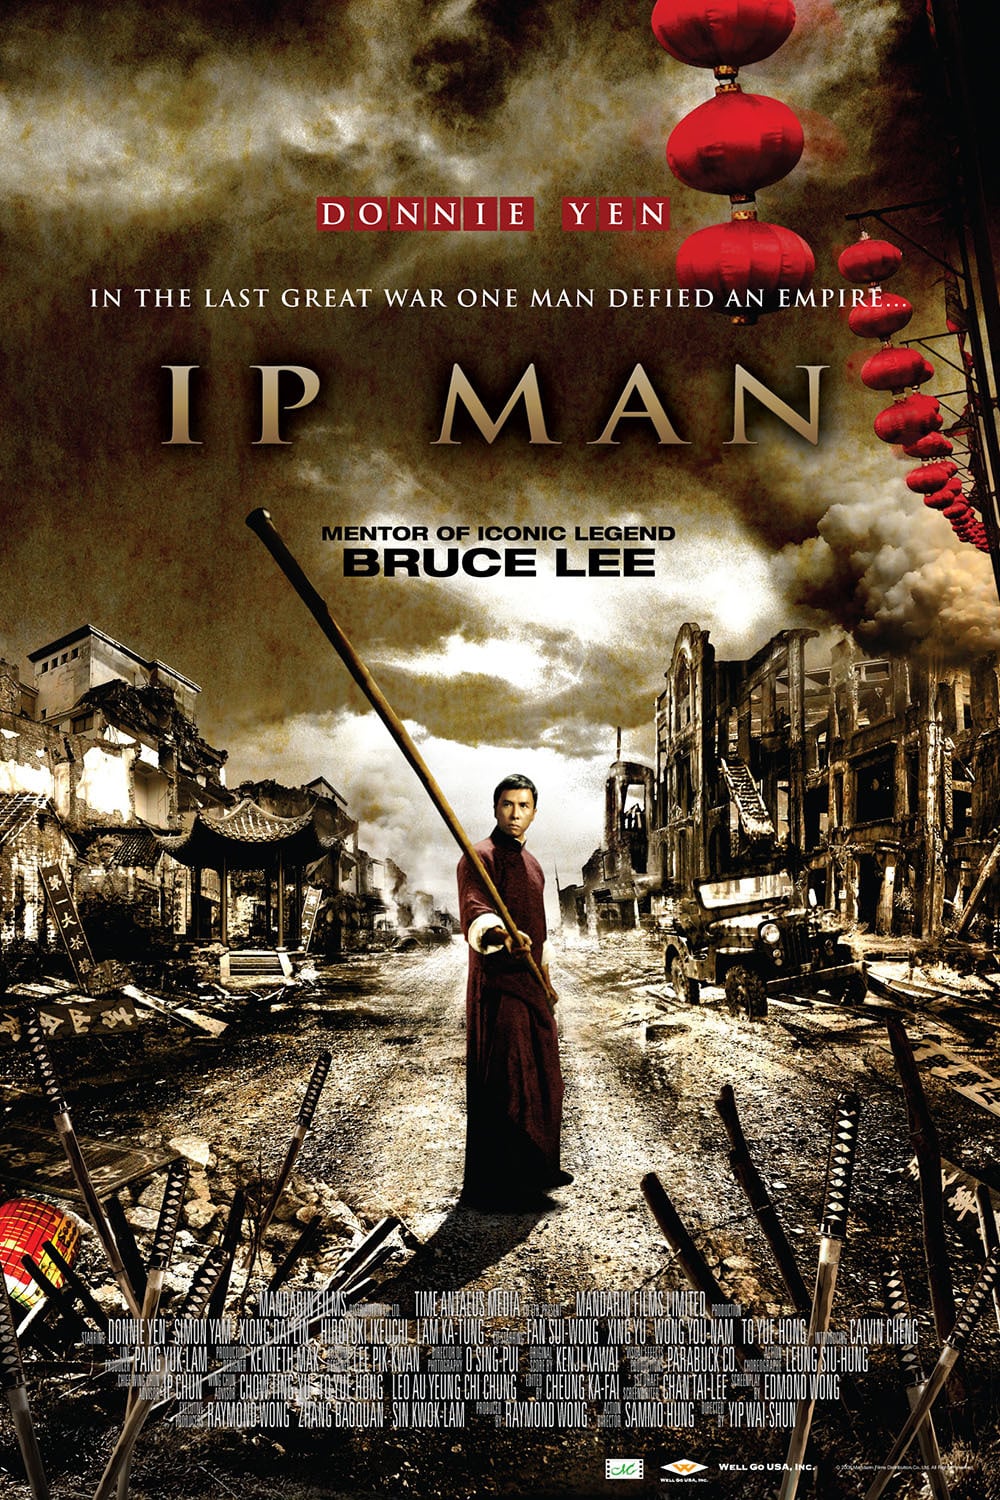 Ip Man is a 2008 Hong Kong biographical martial arts film based on the life of Ip Man, a grandmaster of the martial art Wing Chun and teacher of Bruce Lee.